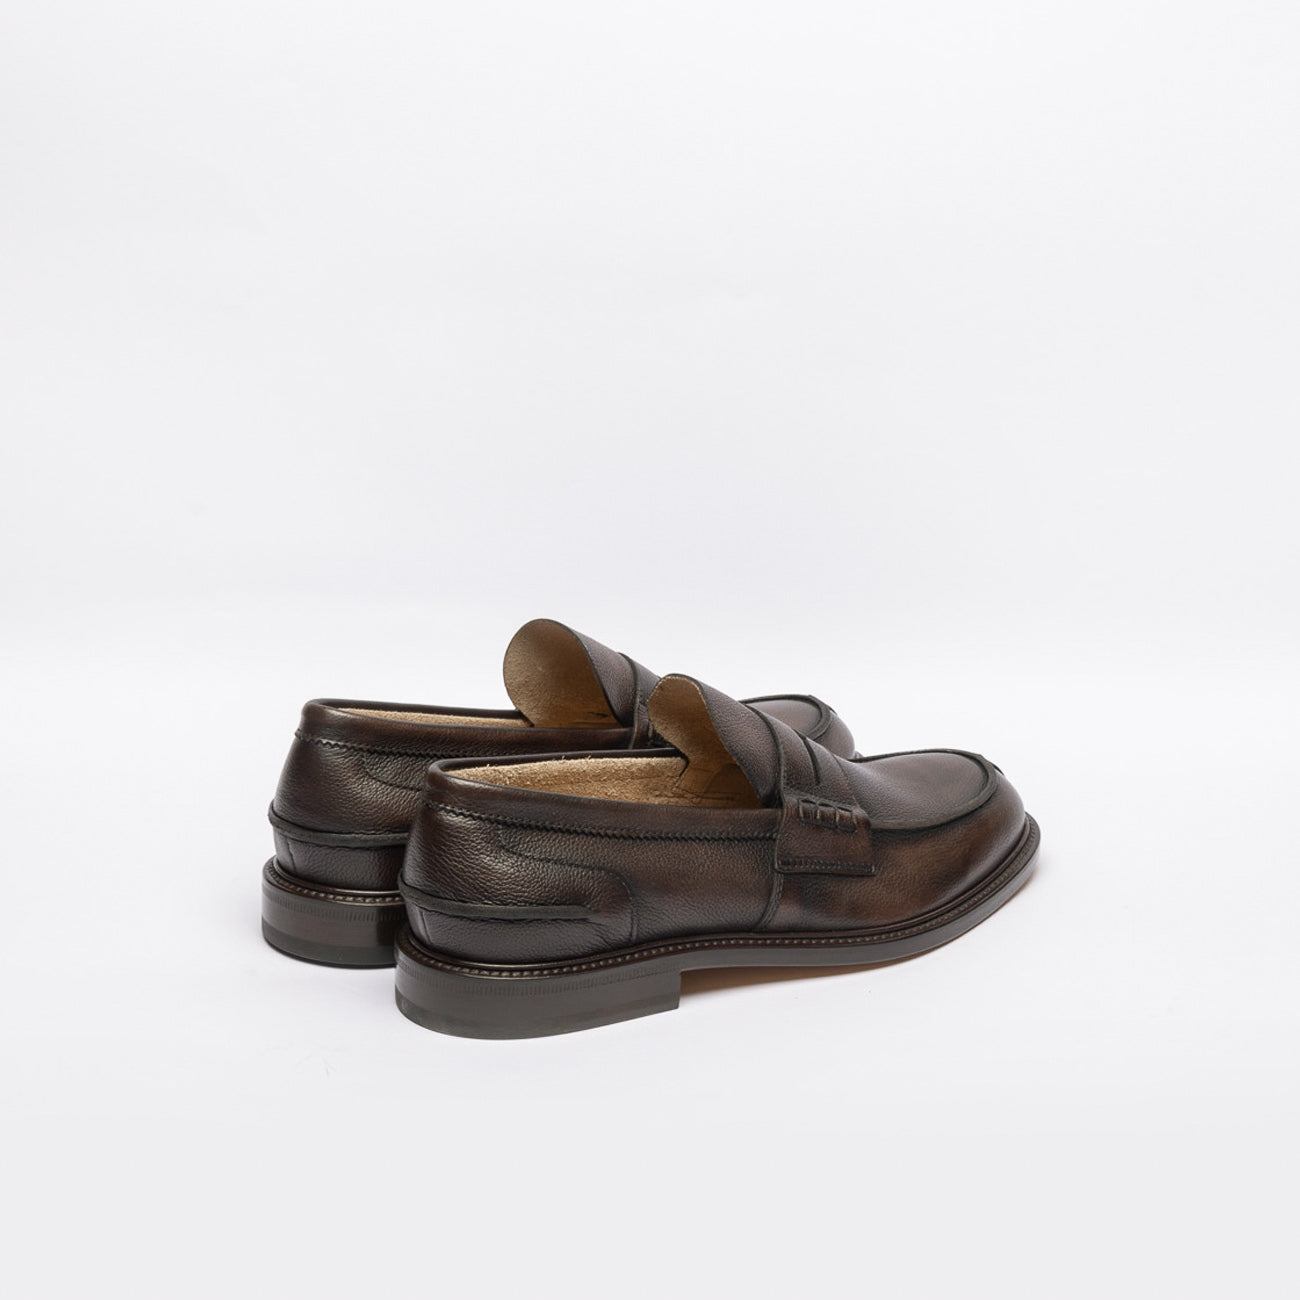 Borghini 784 brown hammered leather penny loafer.